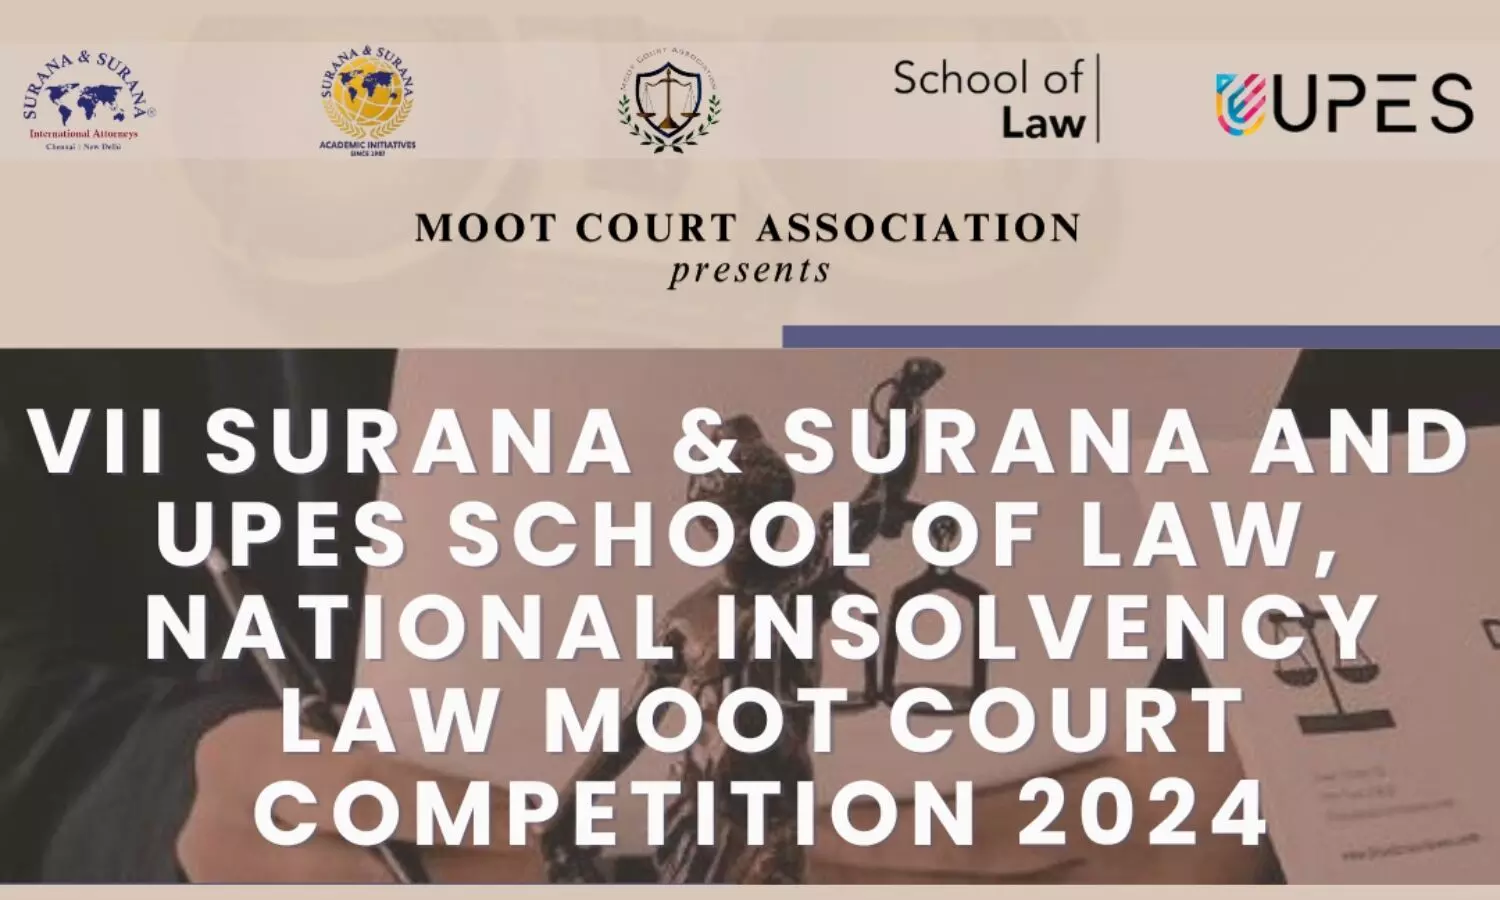 7th Surana & Surana and UPES, School of Law National Insolvency Law Moot Court Competition 2024